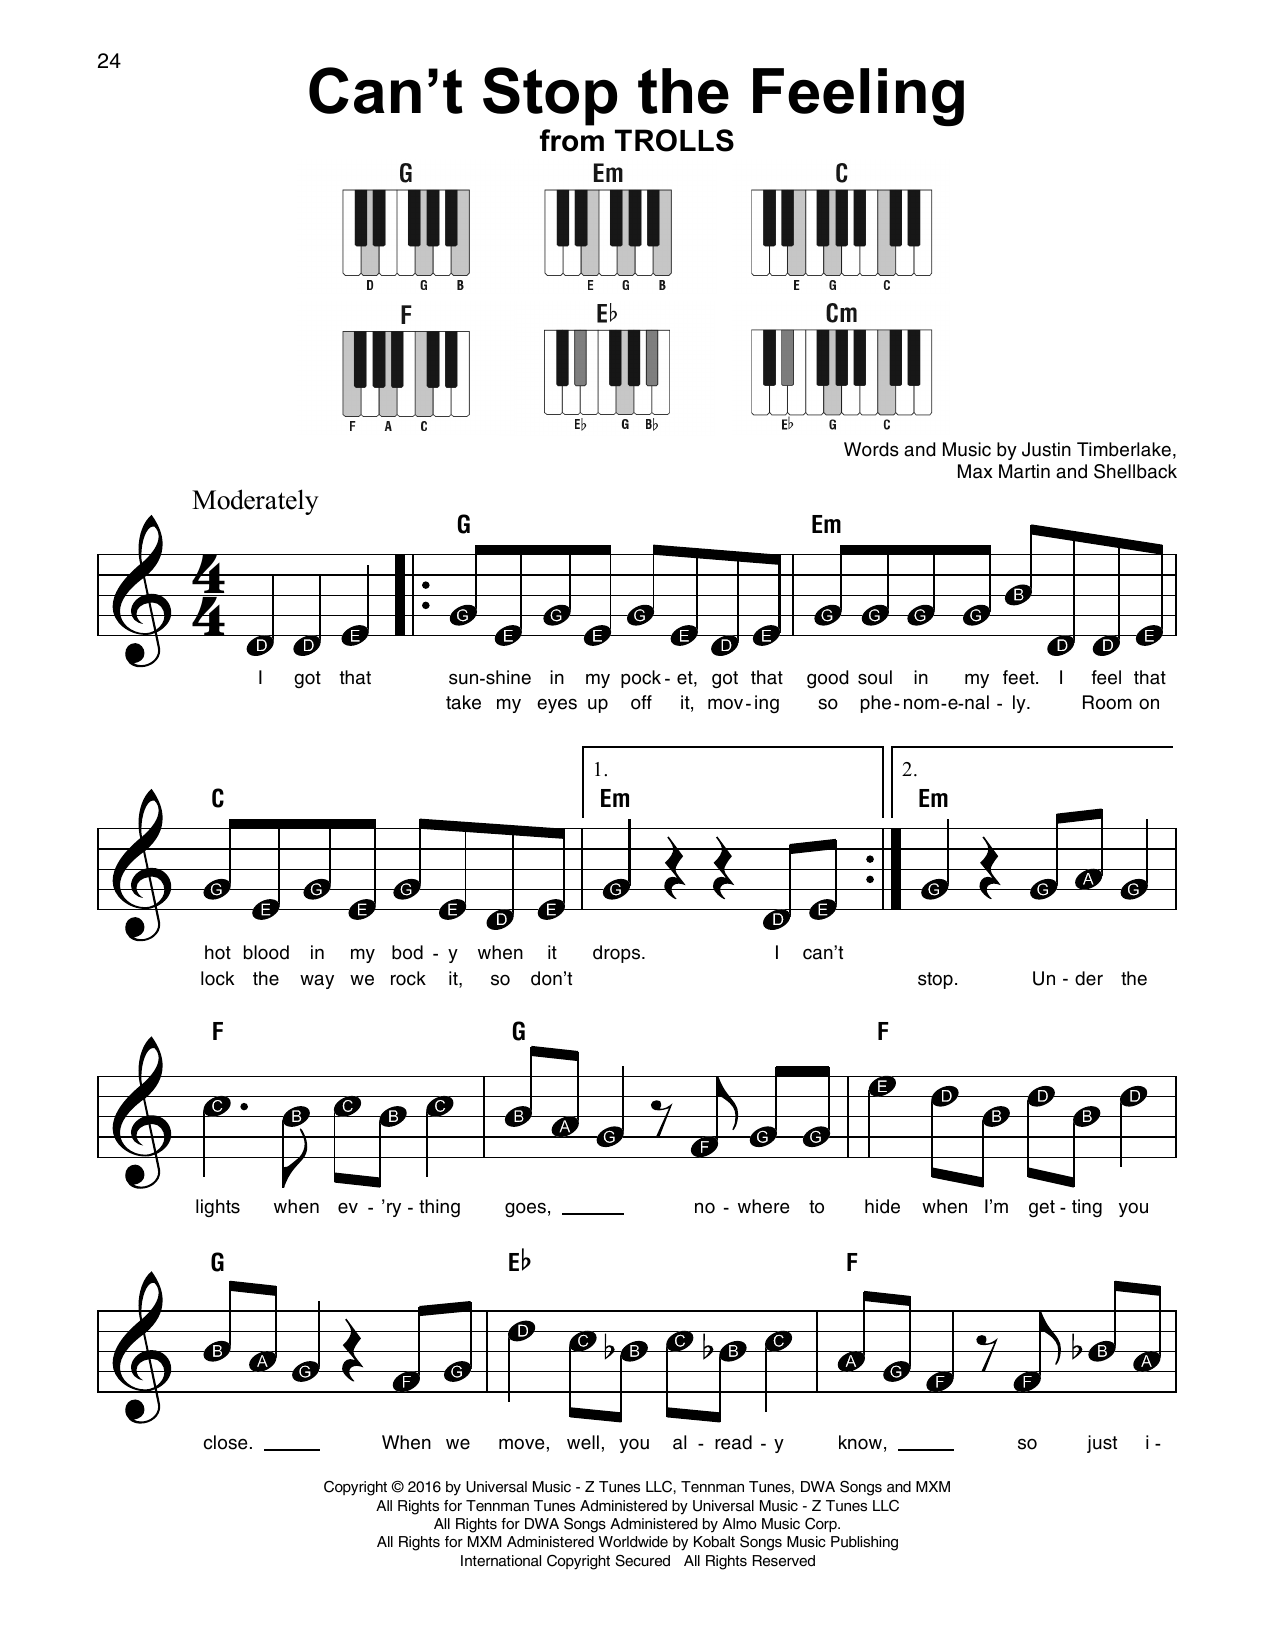 Download Justin Timberlake Can't Stop The Feeling Sheet Music